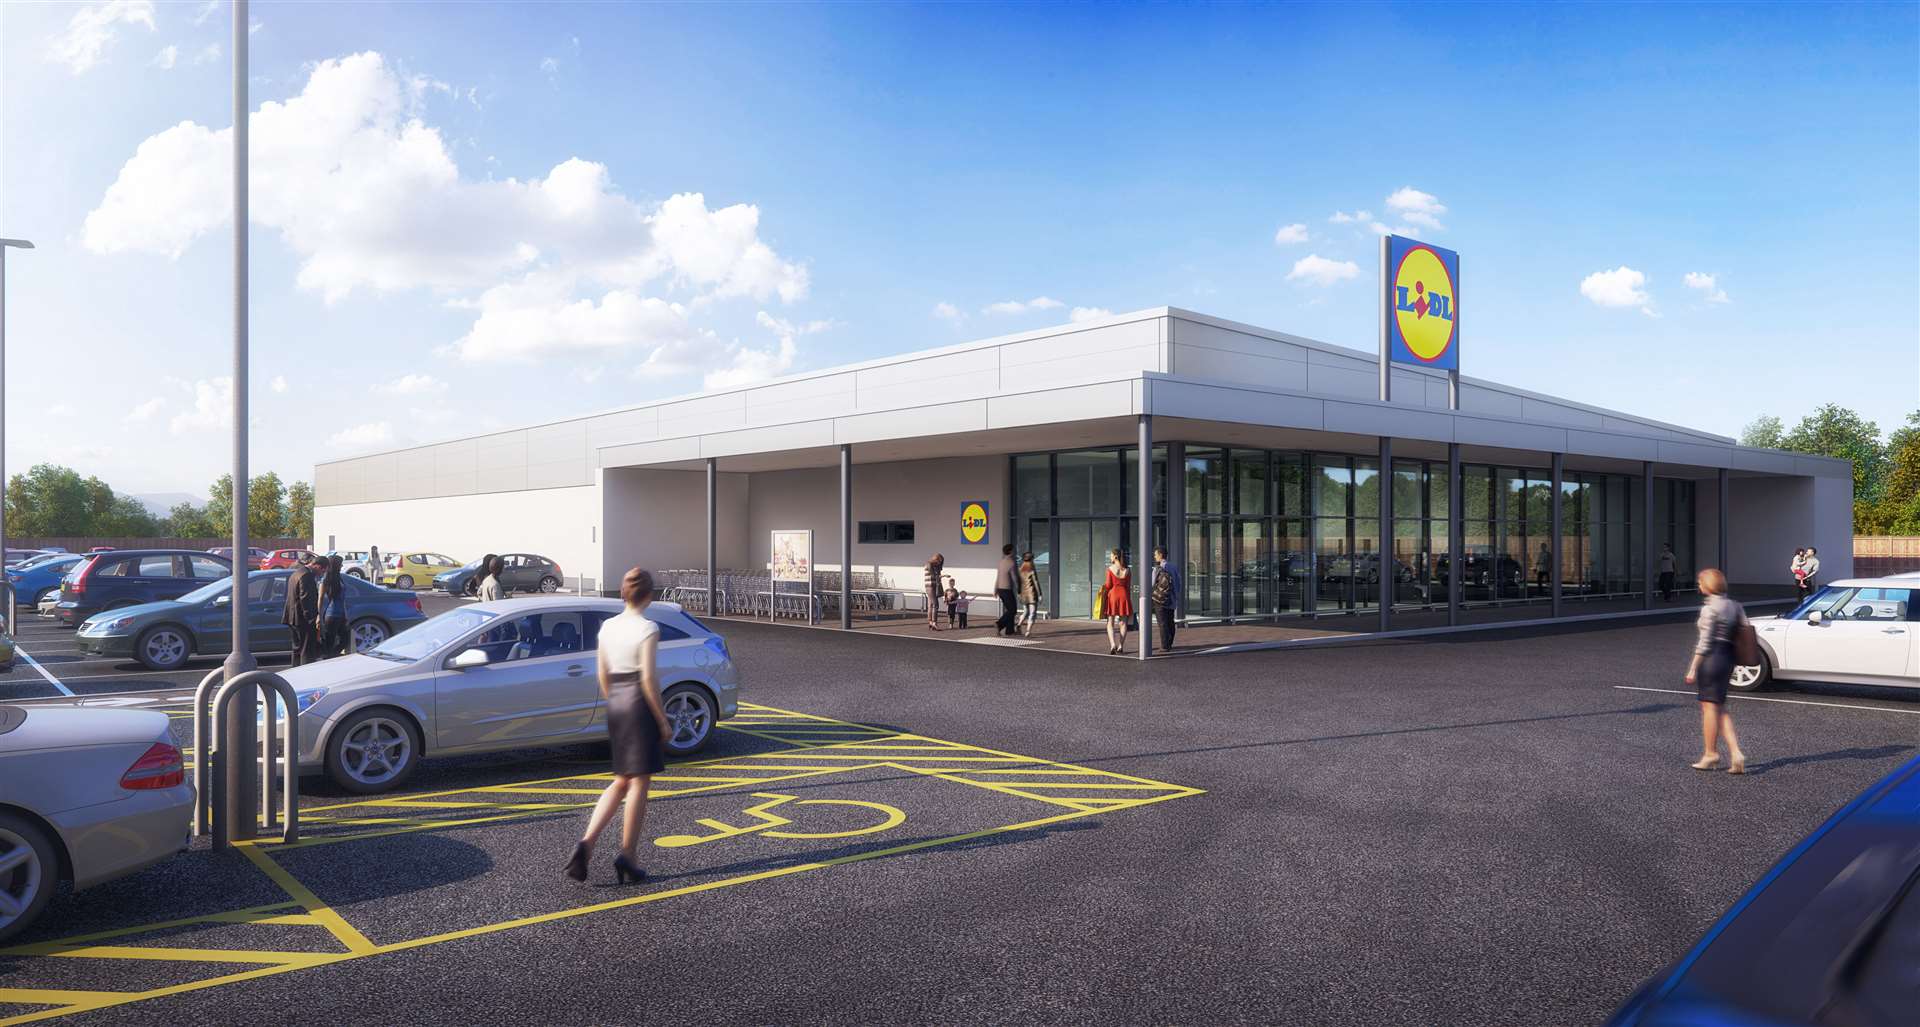 An artist's impression of how the Lidl might look. (26375812)